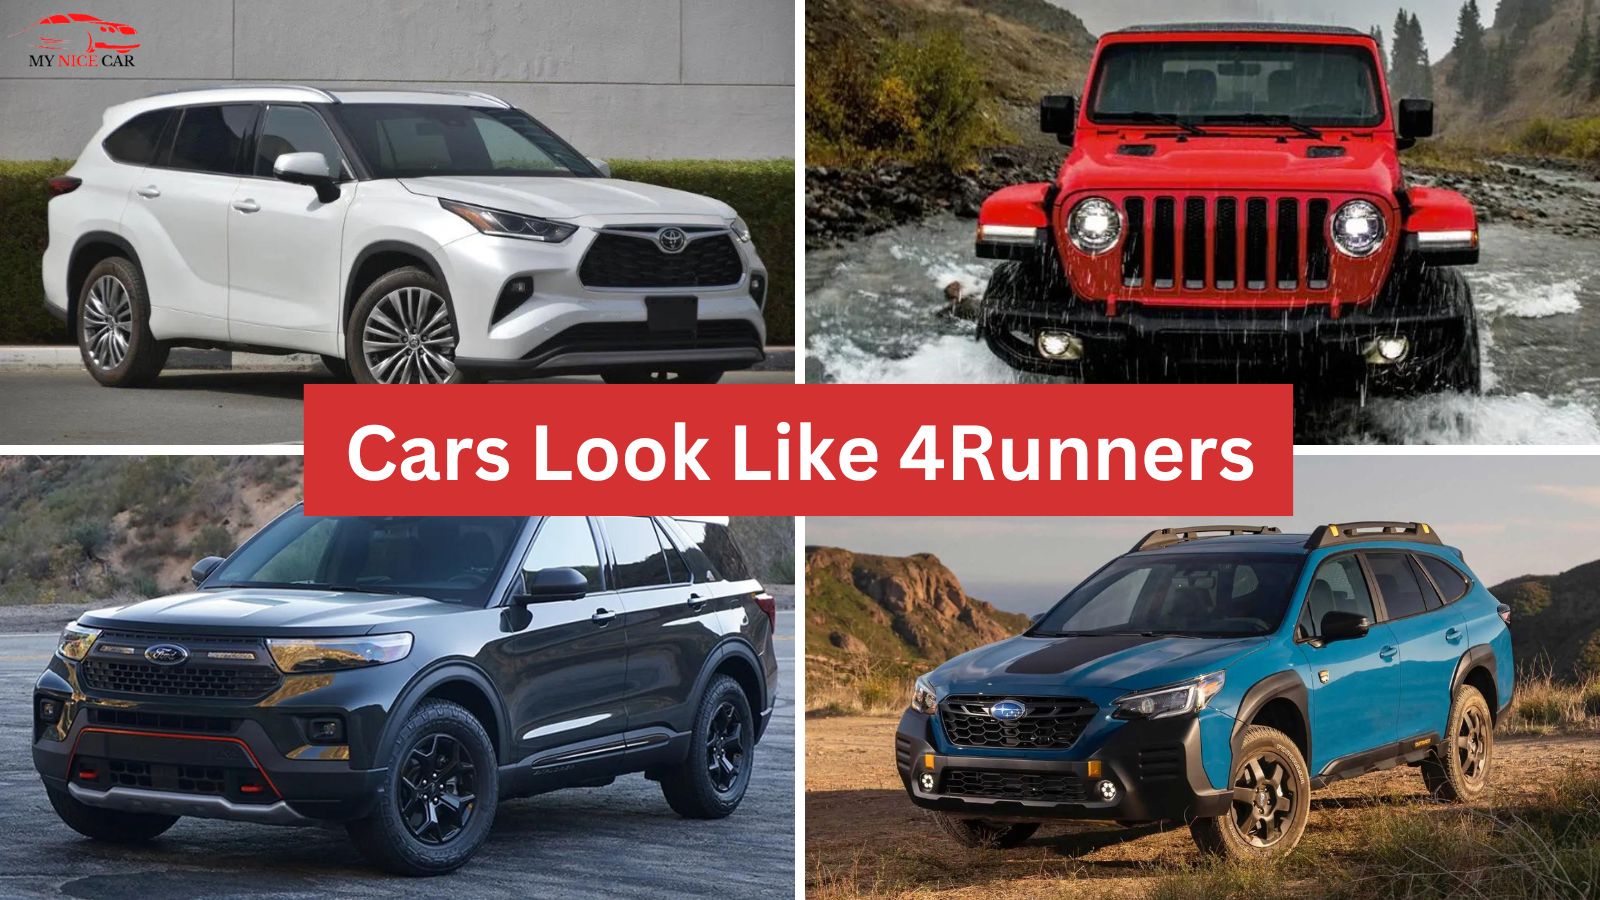 Read more about the article 8 Cars Look Like 4Runners That Make You Do a Double Take